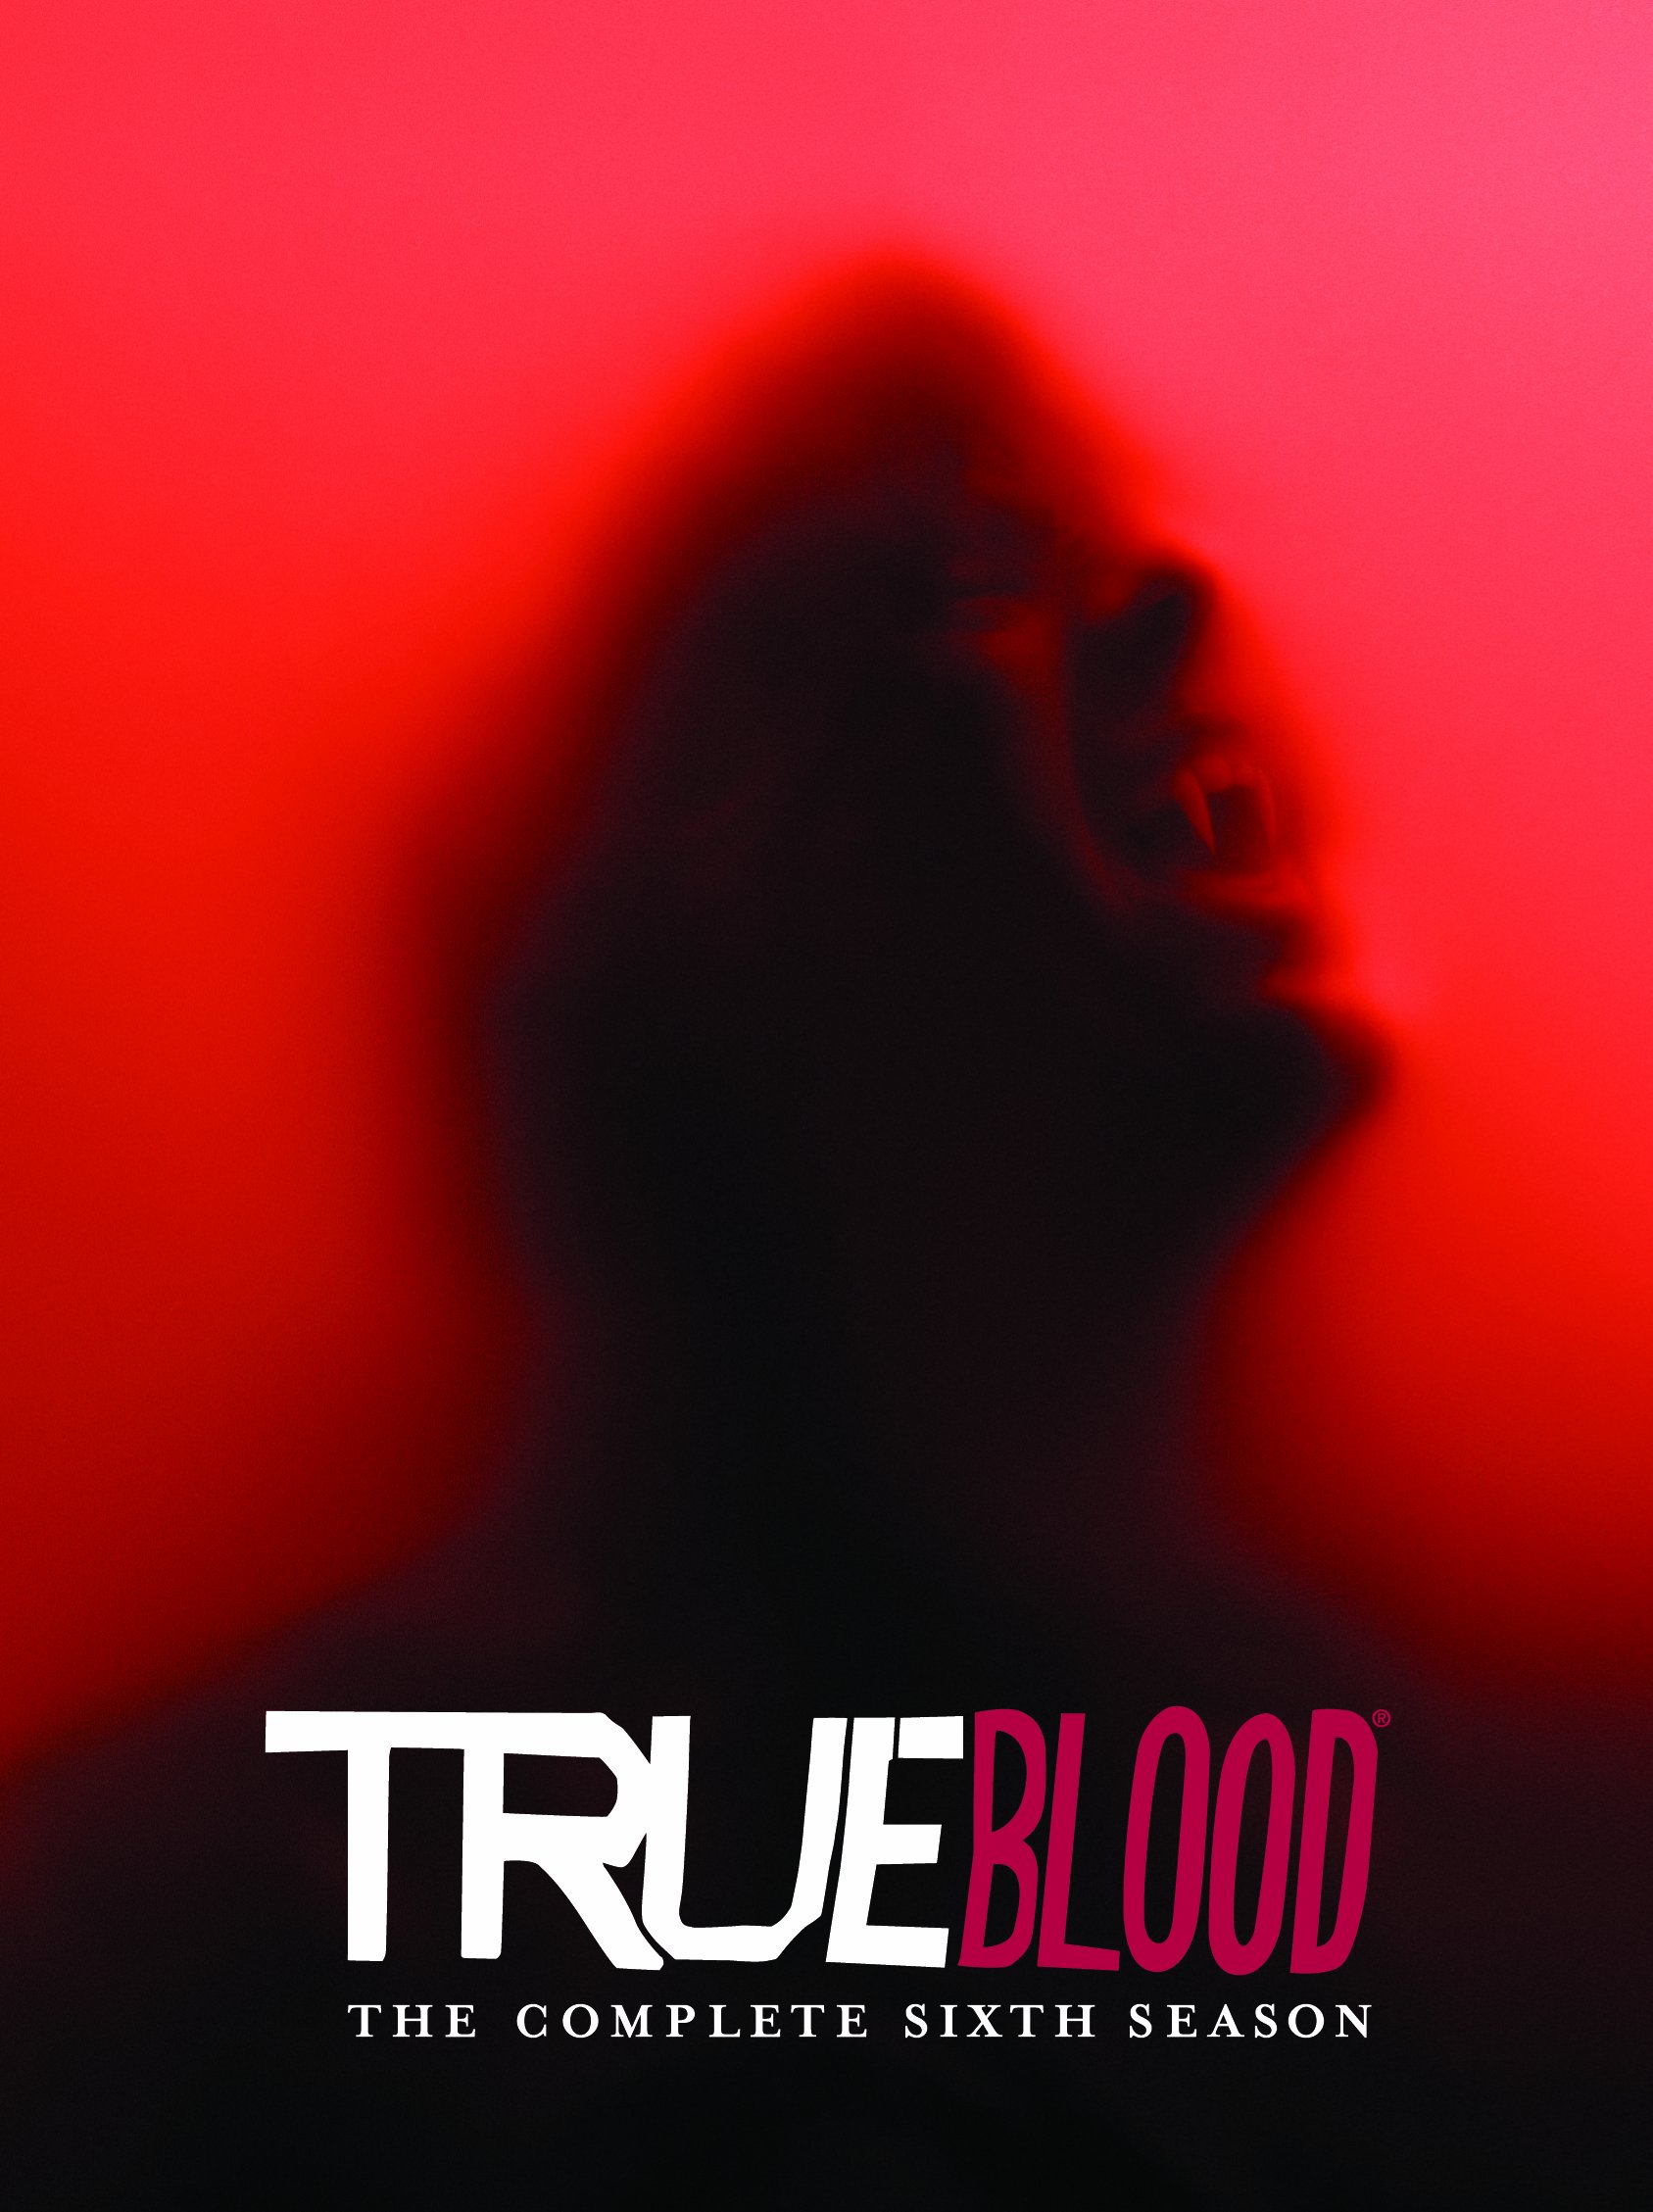 True Blood: The Complete Sixth Season (DVD) - image 1 of 9